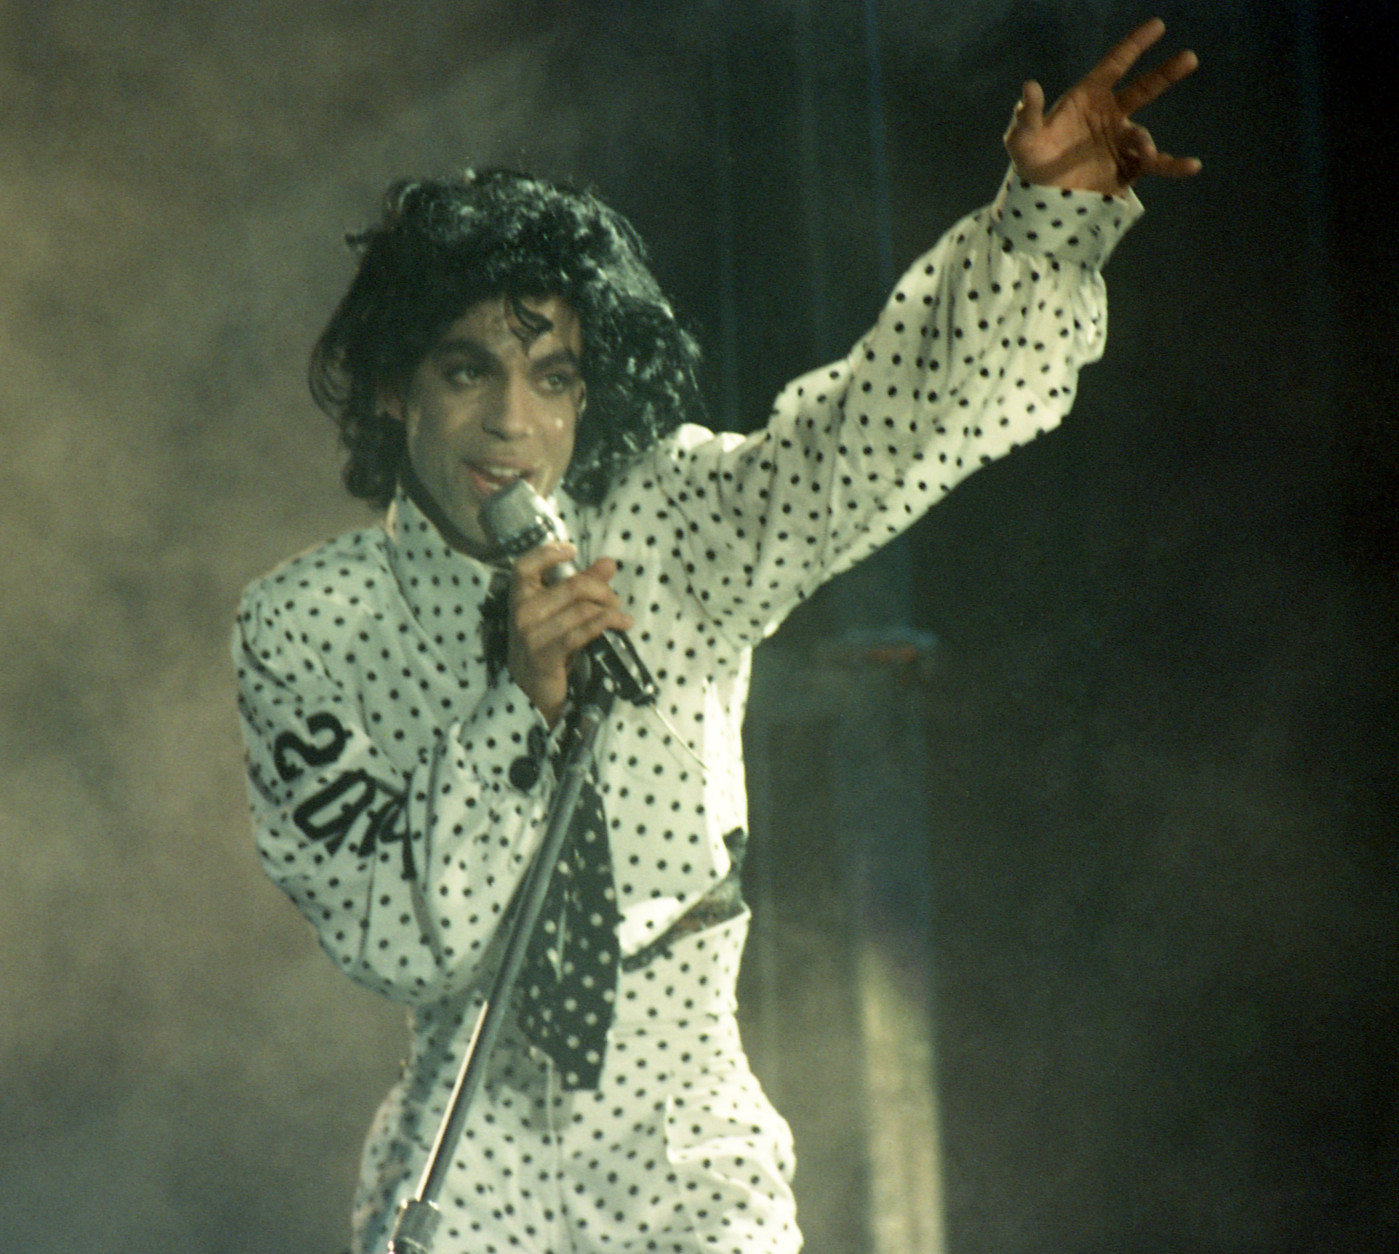 American popstar Prince performing at the Eissporthalle in Frankfurt, Germany during his Parade Tour, on August 26, 1986. (AP Photo)